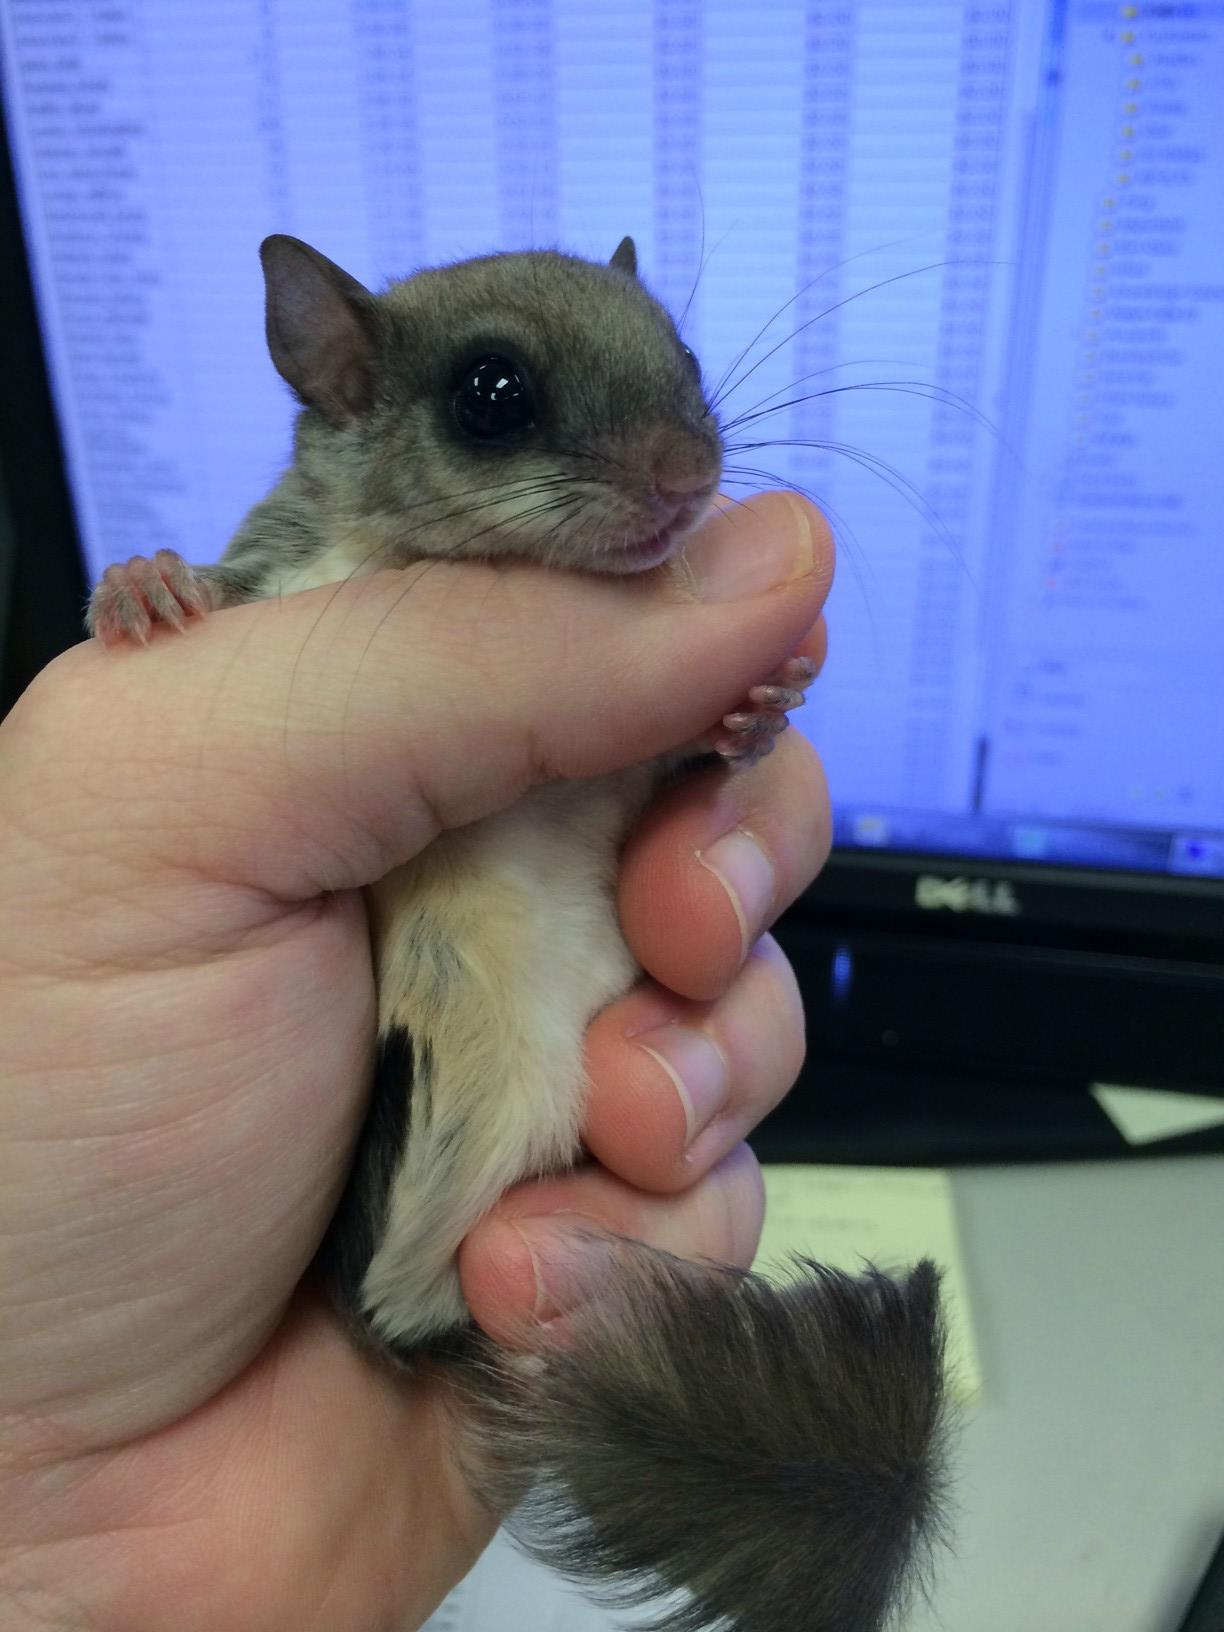 He Found a southern flying squirrel Lying Half Dead and Did the Most amazing thing